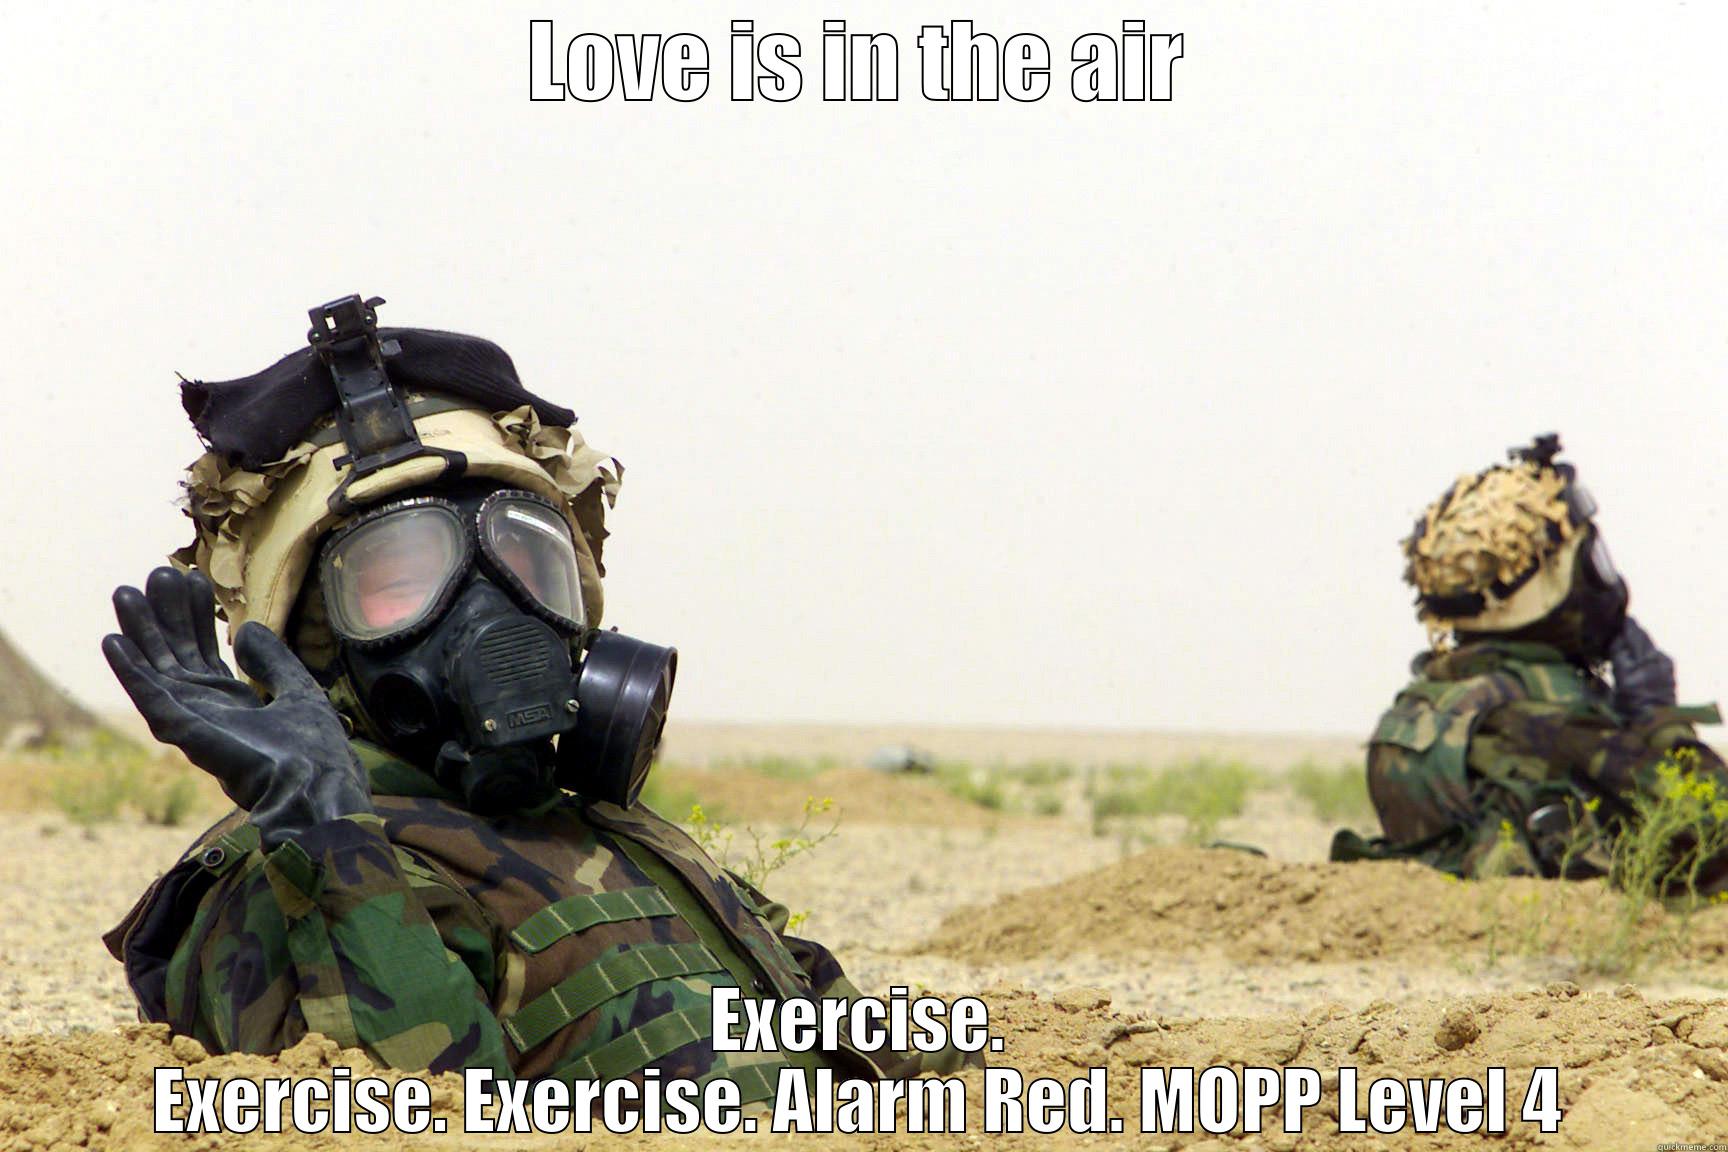 MOPP 4 - LOVE IS IN THE AIR EXERCISE. EXERCISE. EXERCISE. ALARM RED. MOPP LEVEL 4 Misc